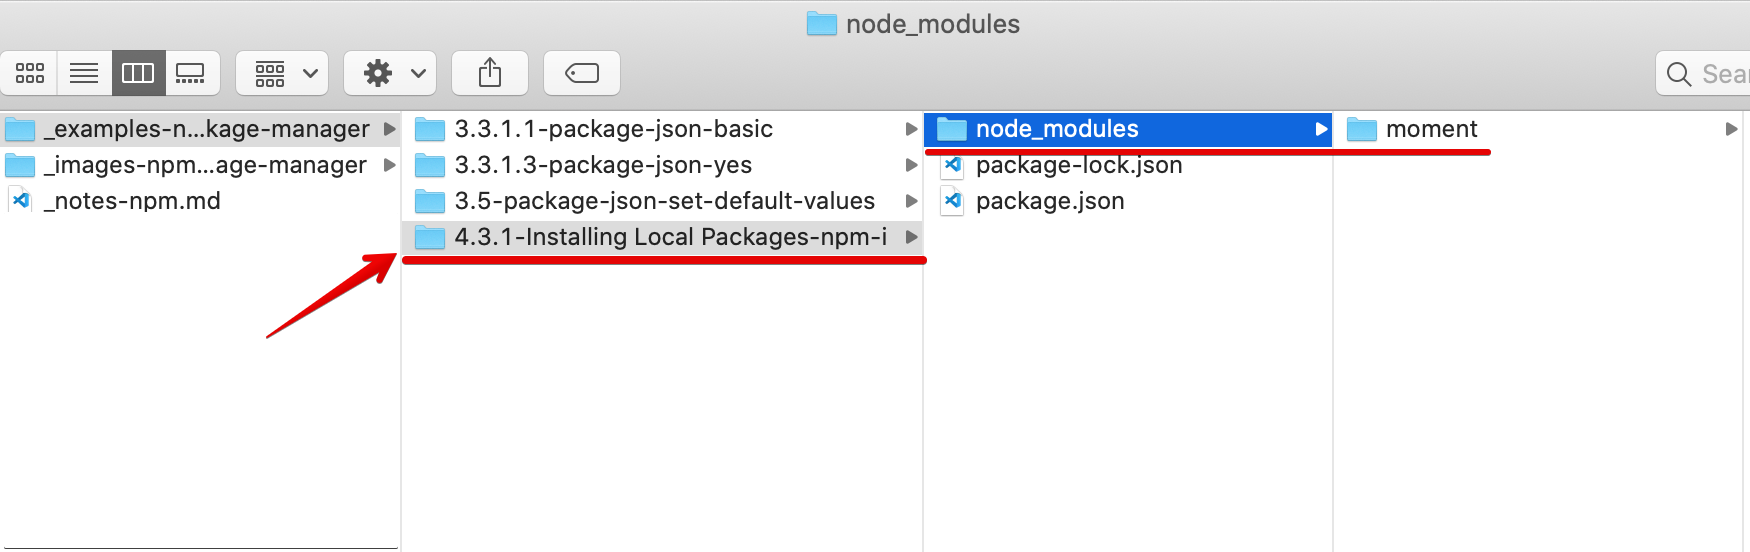 Installing local package: folder structure